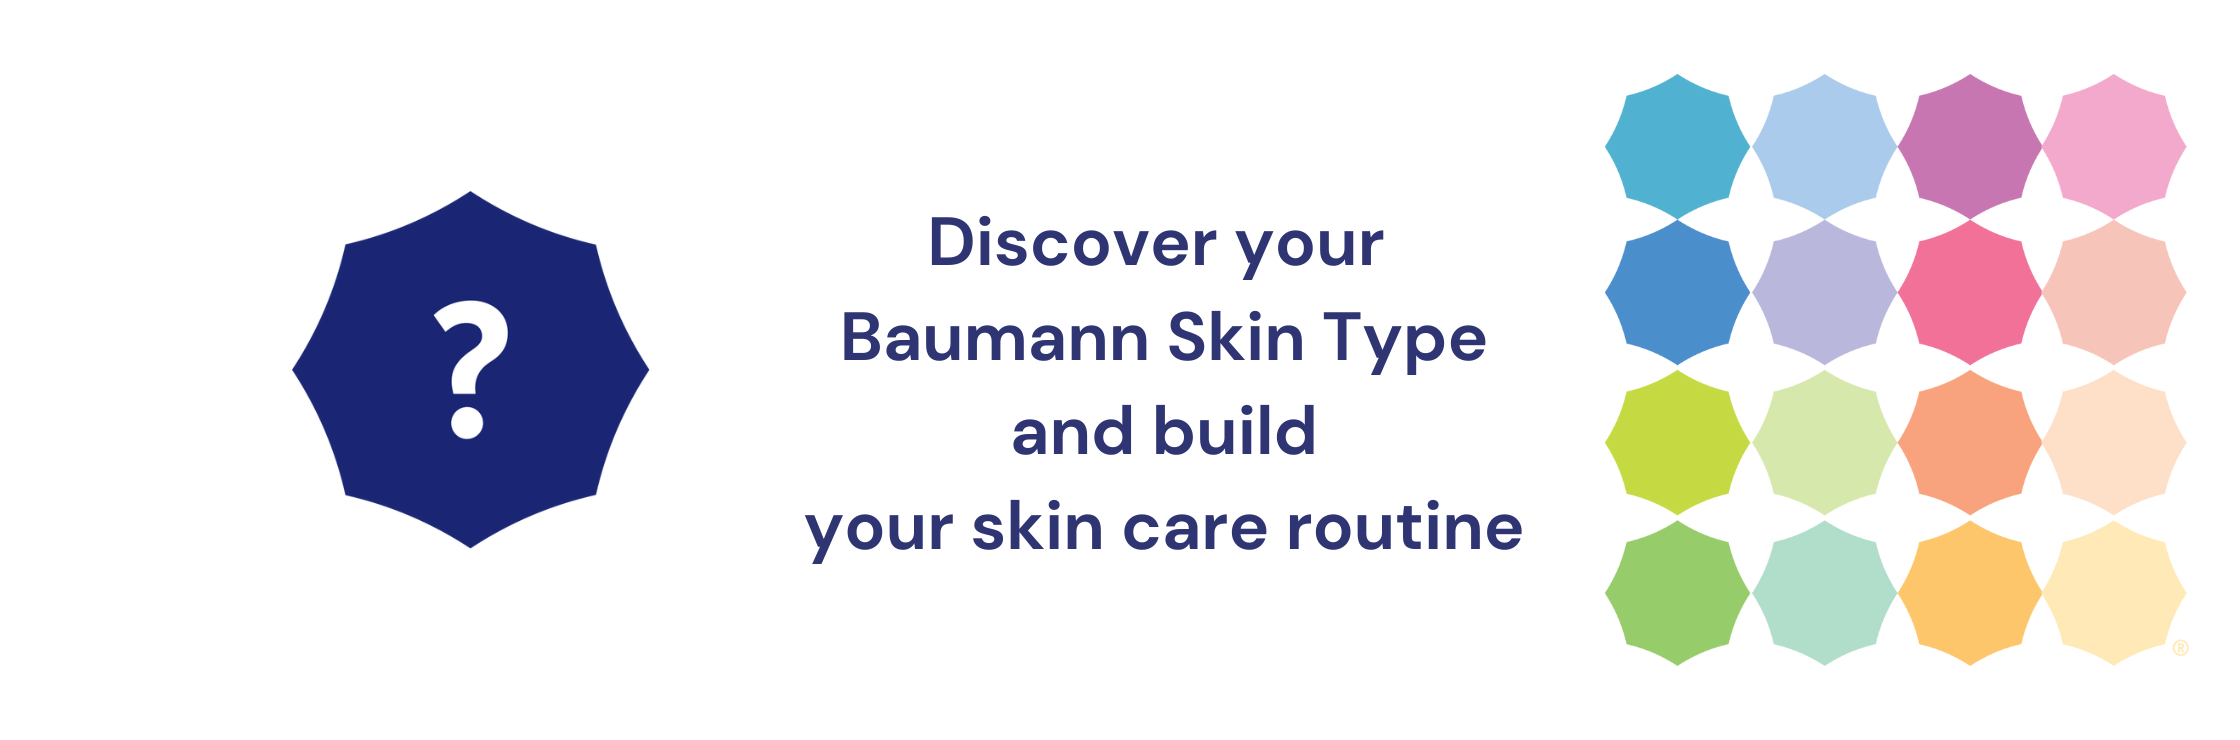 Discover your baumann skin type